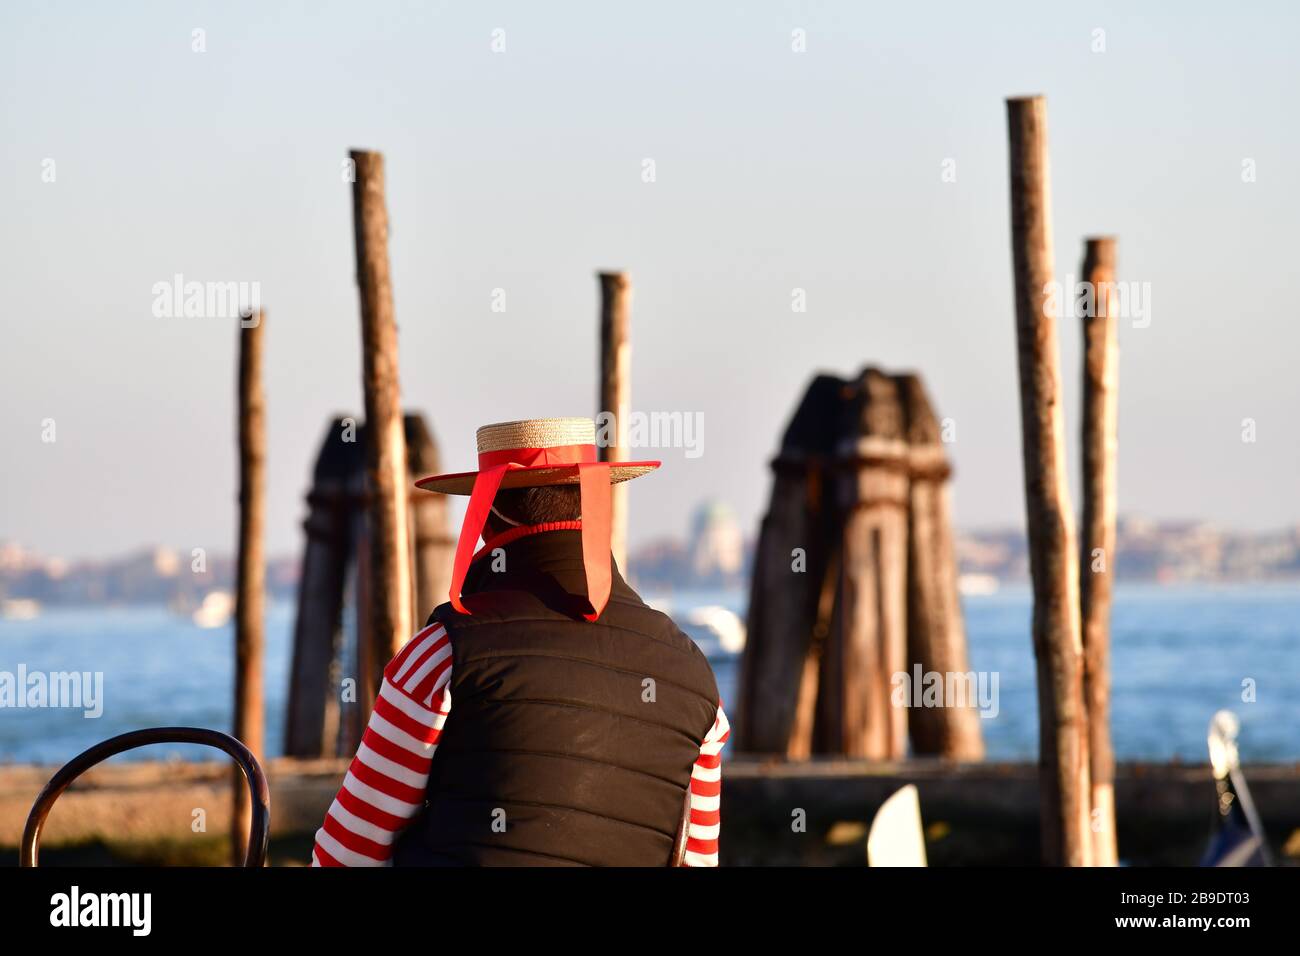 Gondolier with hat on and red-white striped shirt taking a rest overlooking the lagoon of Venice from a chair Stock Photo